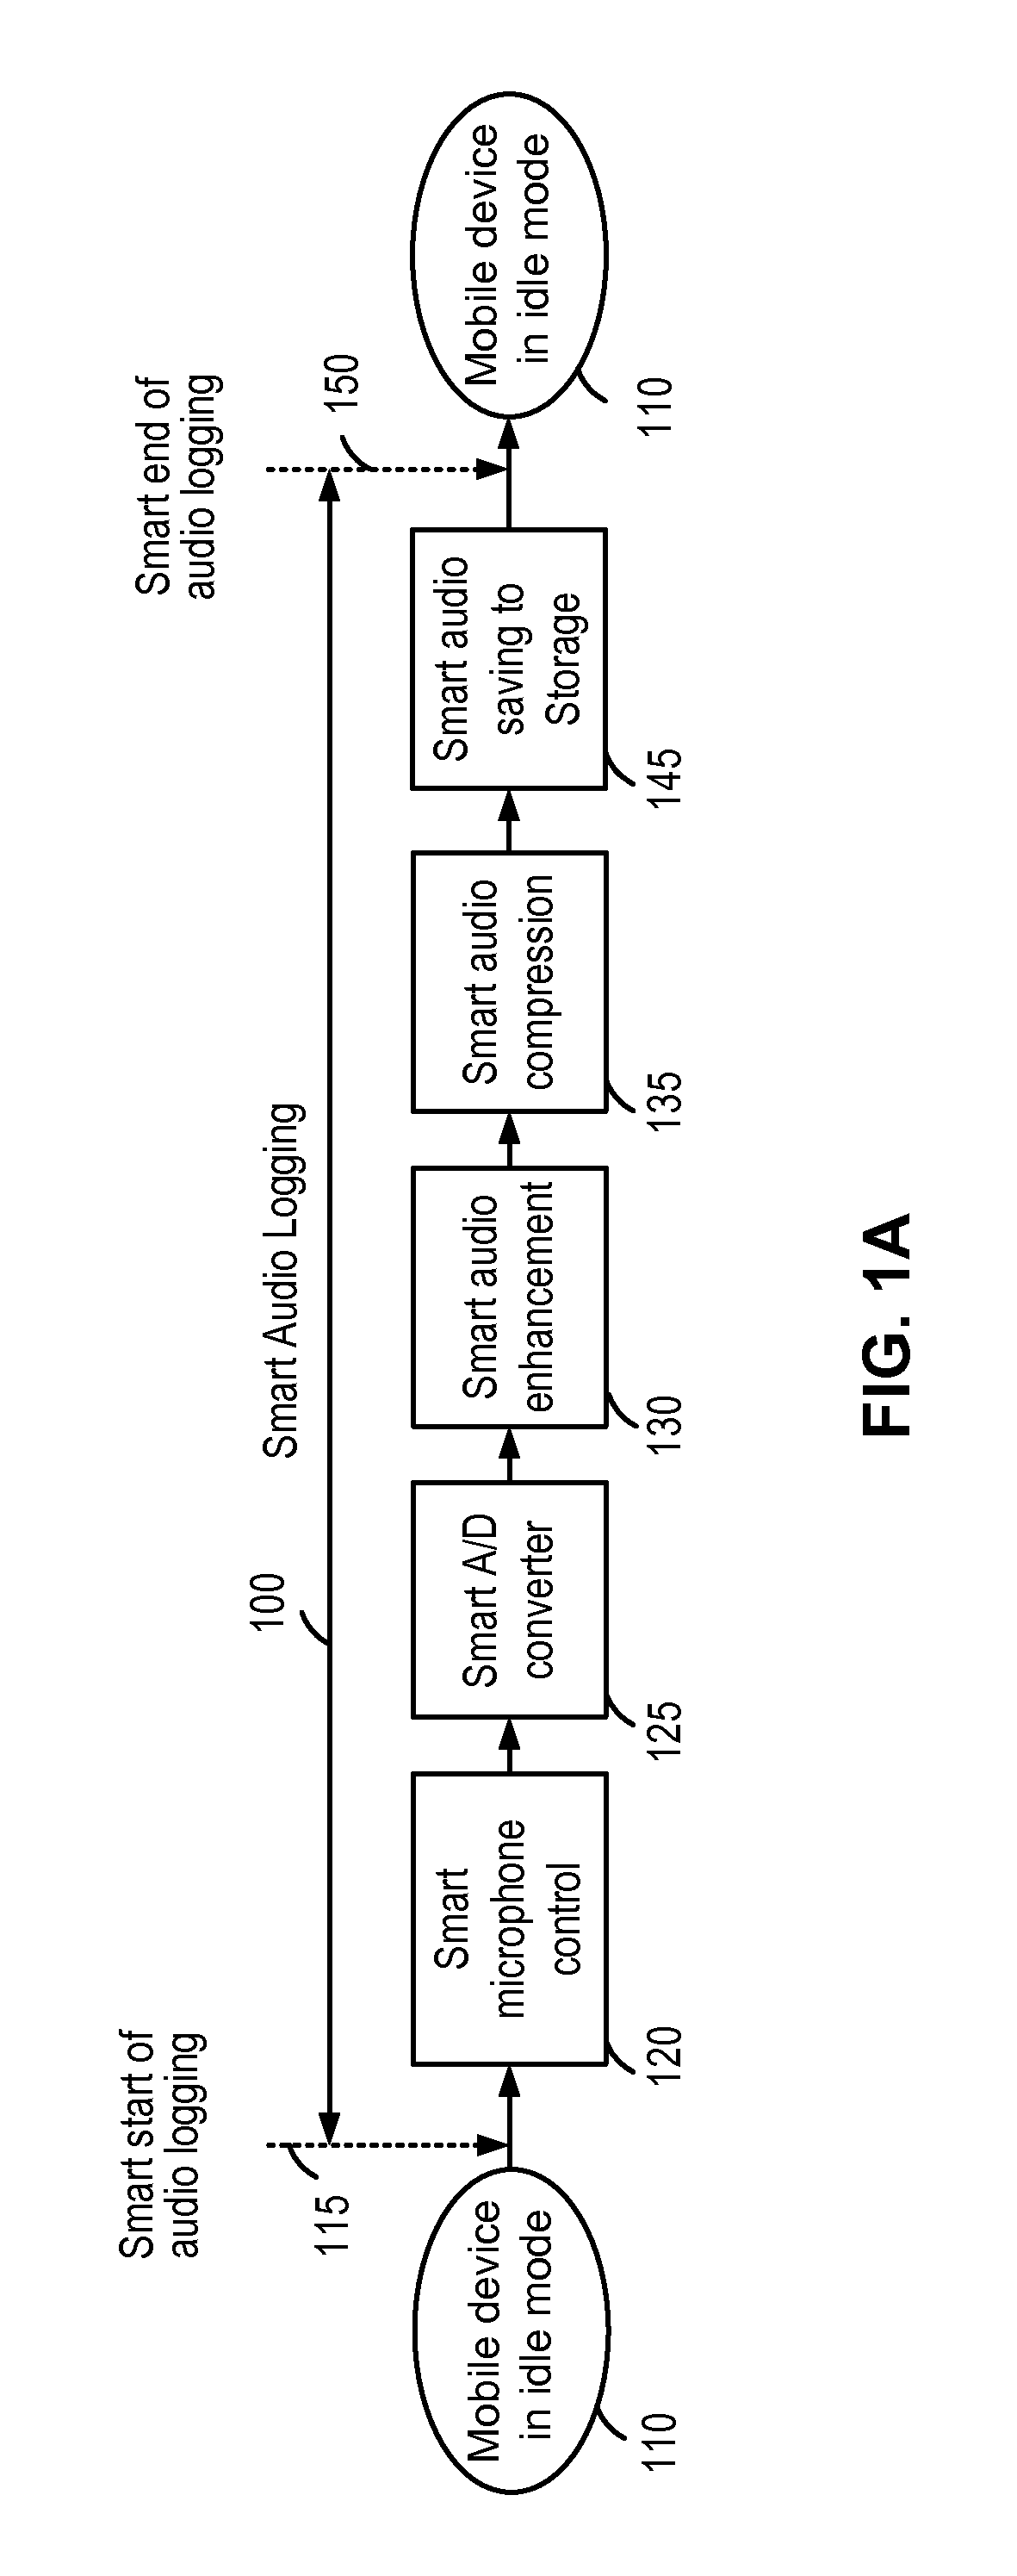 System and method of smart audio logging for mobile devices